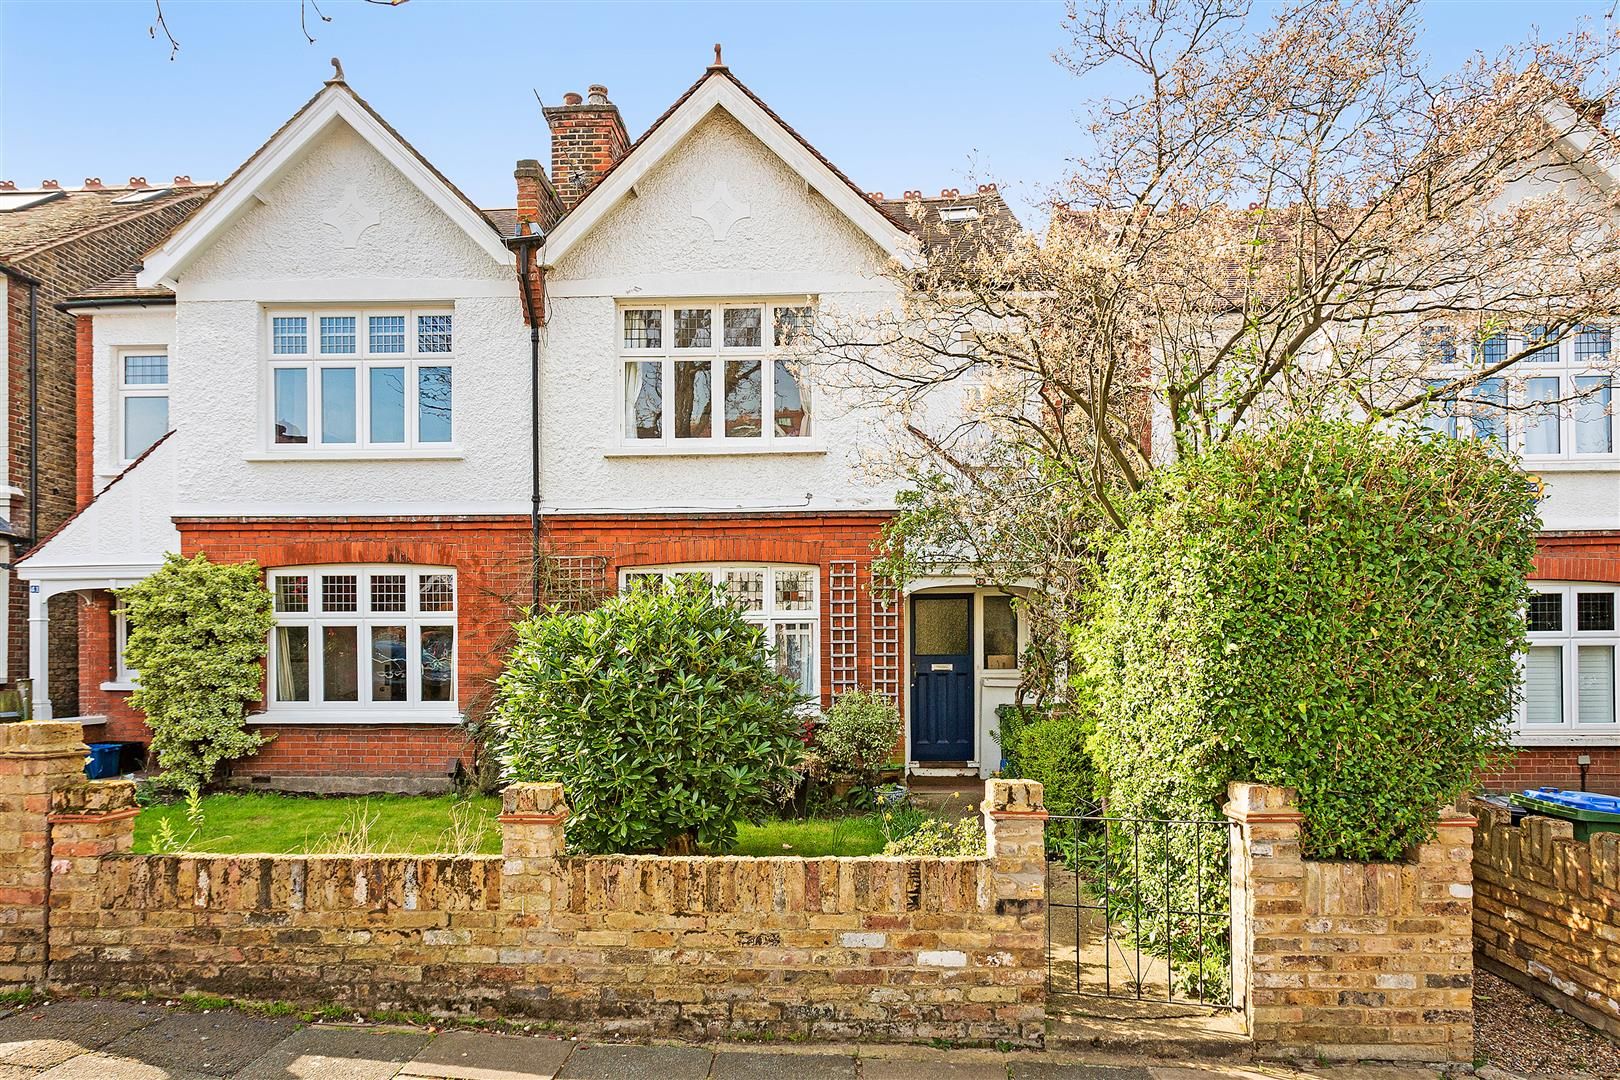 Deanhill Road, East Sheen, SW14 7DQ